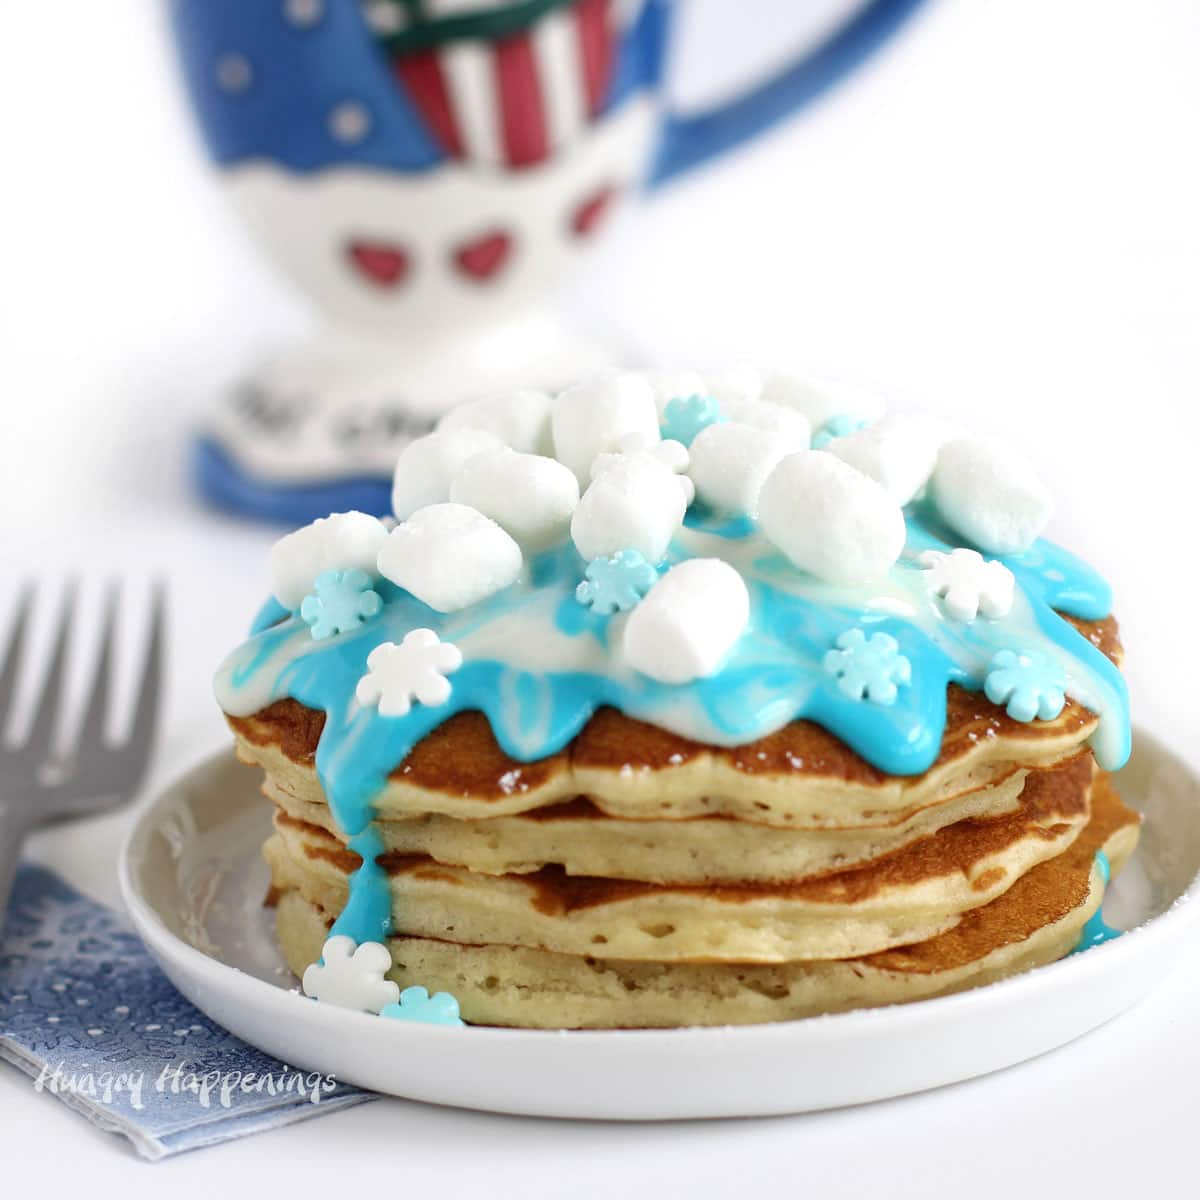 Copycat IHop Winter Wonderland Pancakes topped with blue and white swirled icing, mini marshmallows, and candy snowflakes.